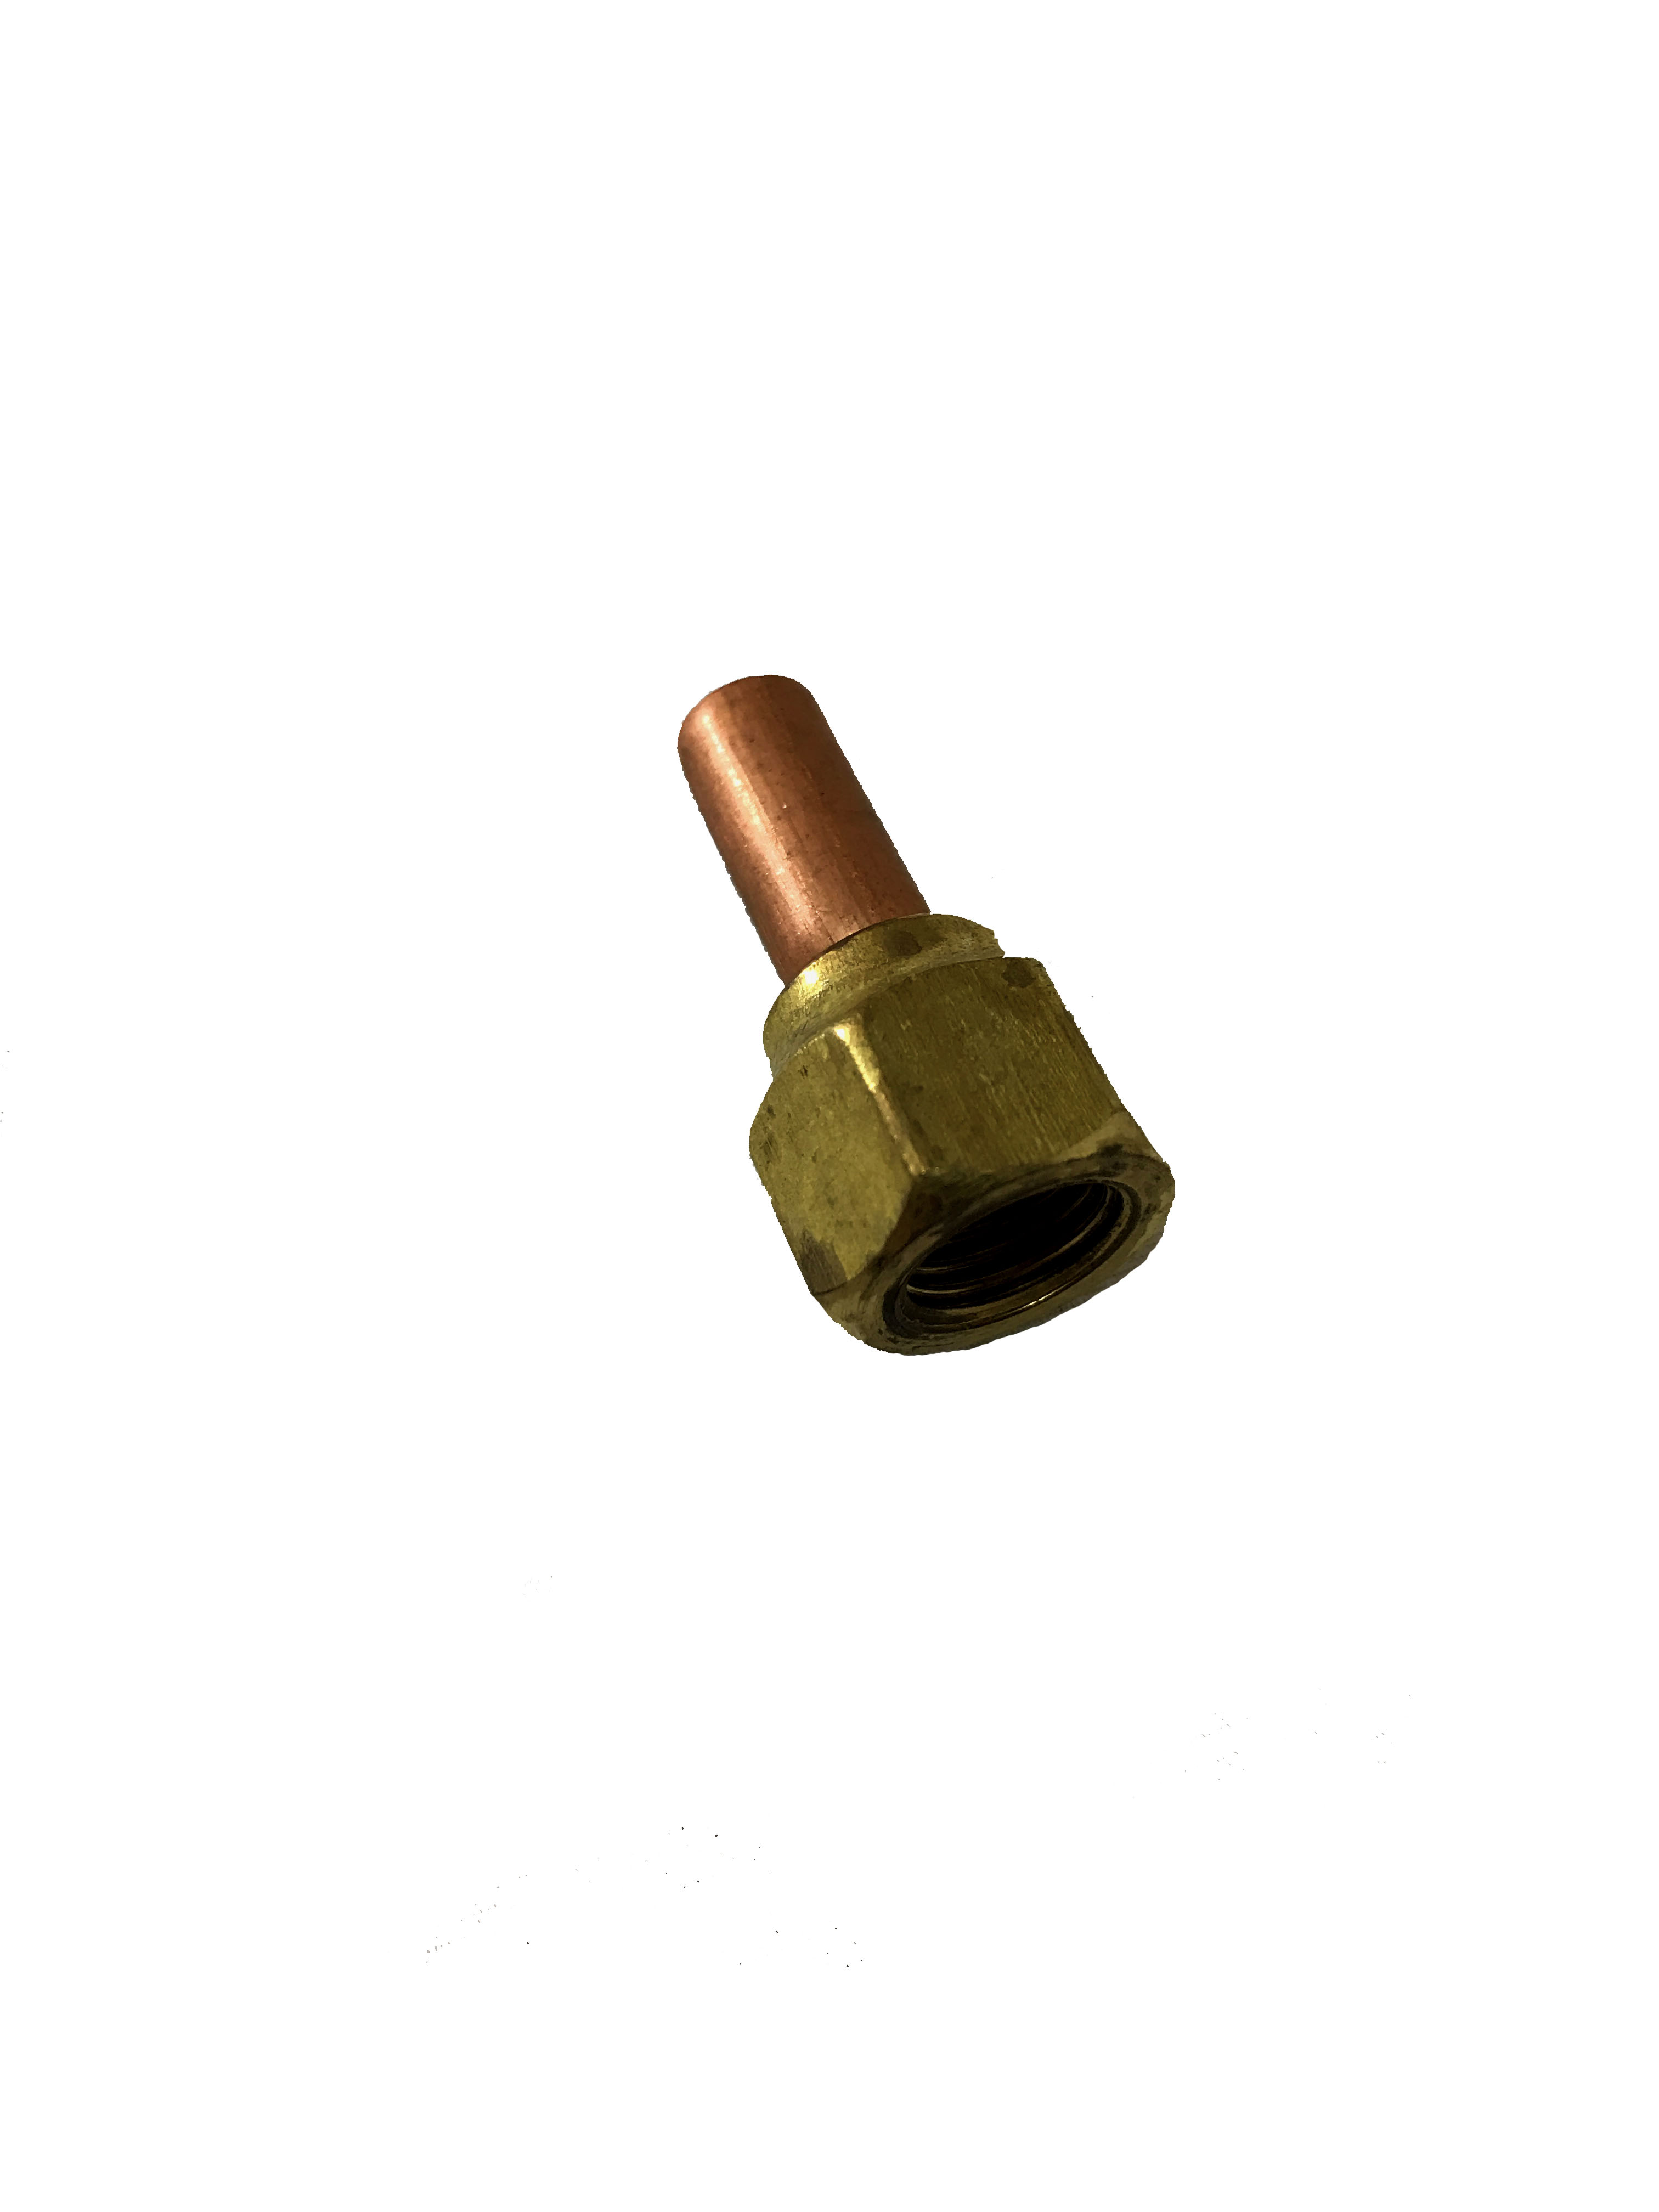 Swivel Female Flare Connector - JB Industries